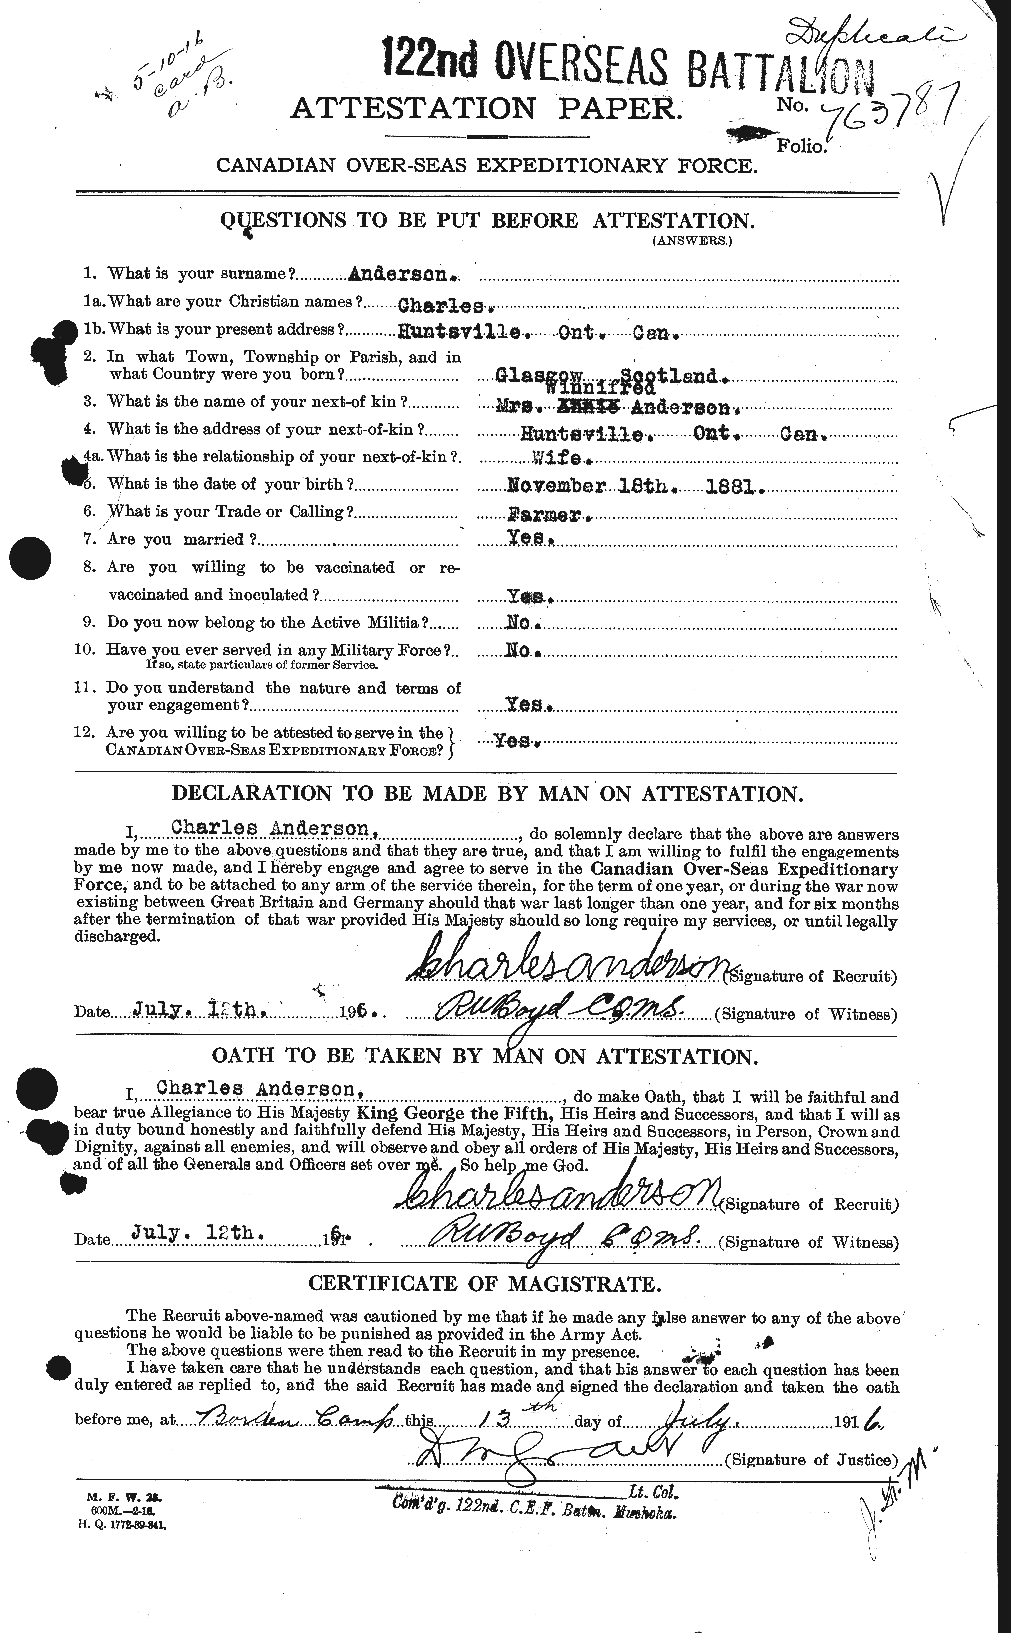 Personnel Records of the First World War - CEF 209270a